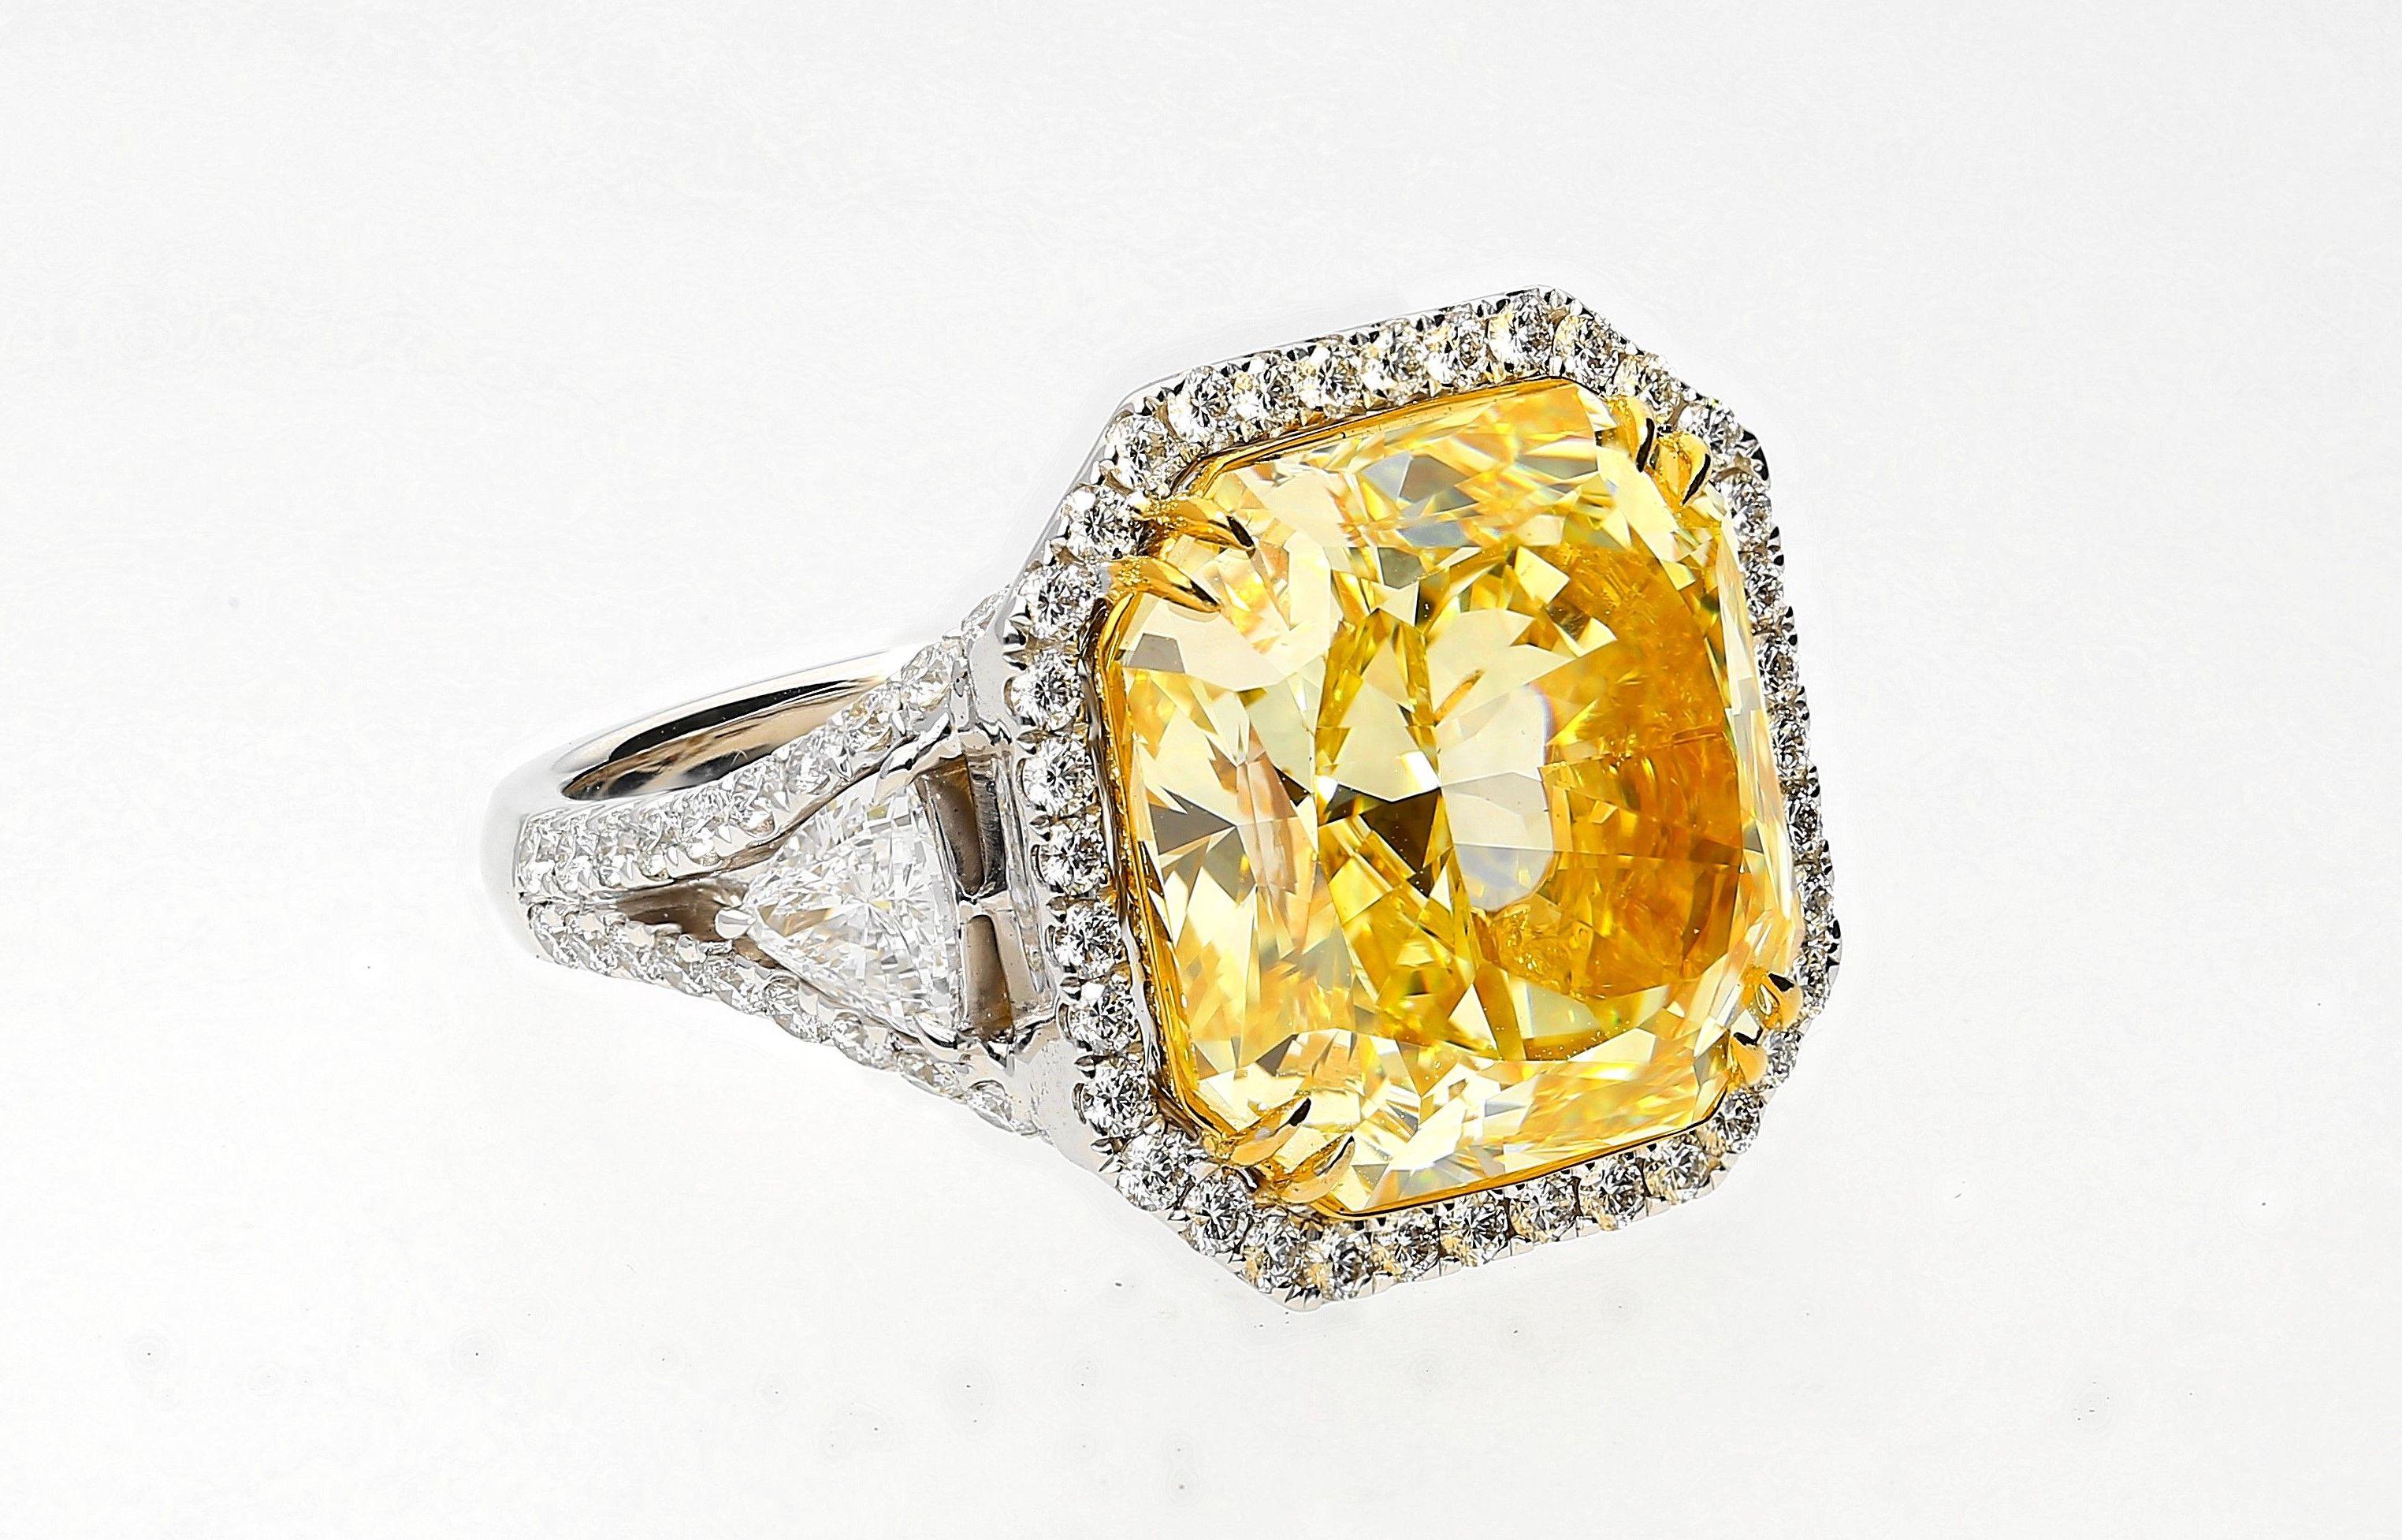 Centering a magnificent 13.14 Carat Radiant-Cut Fancy Intense Yellow Colored Diamond of VVS1 Clarity, accented by an additional nearly 2 carats of White Diamonds, and set in lavish 18K White Gold, this masterpiece is the quintessential